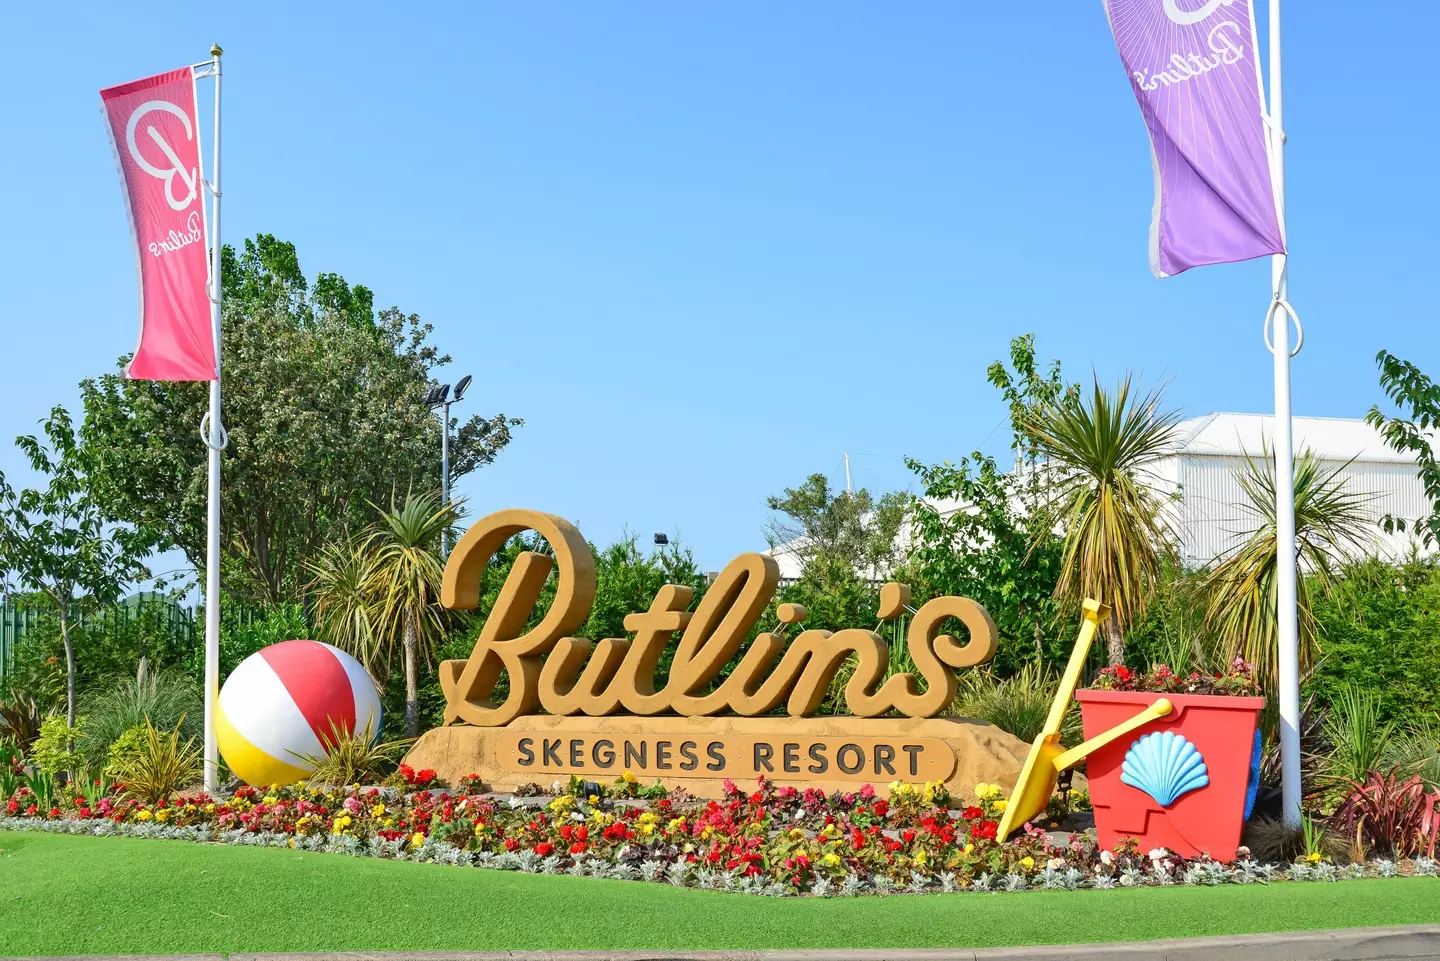 Butlin's parks are located in costal areas throughout the UK.